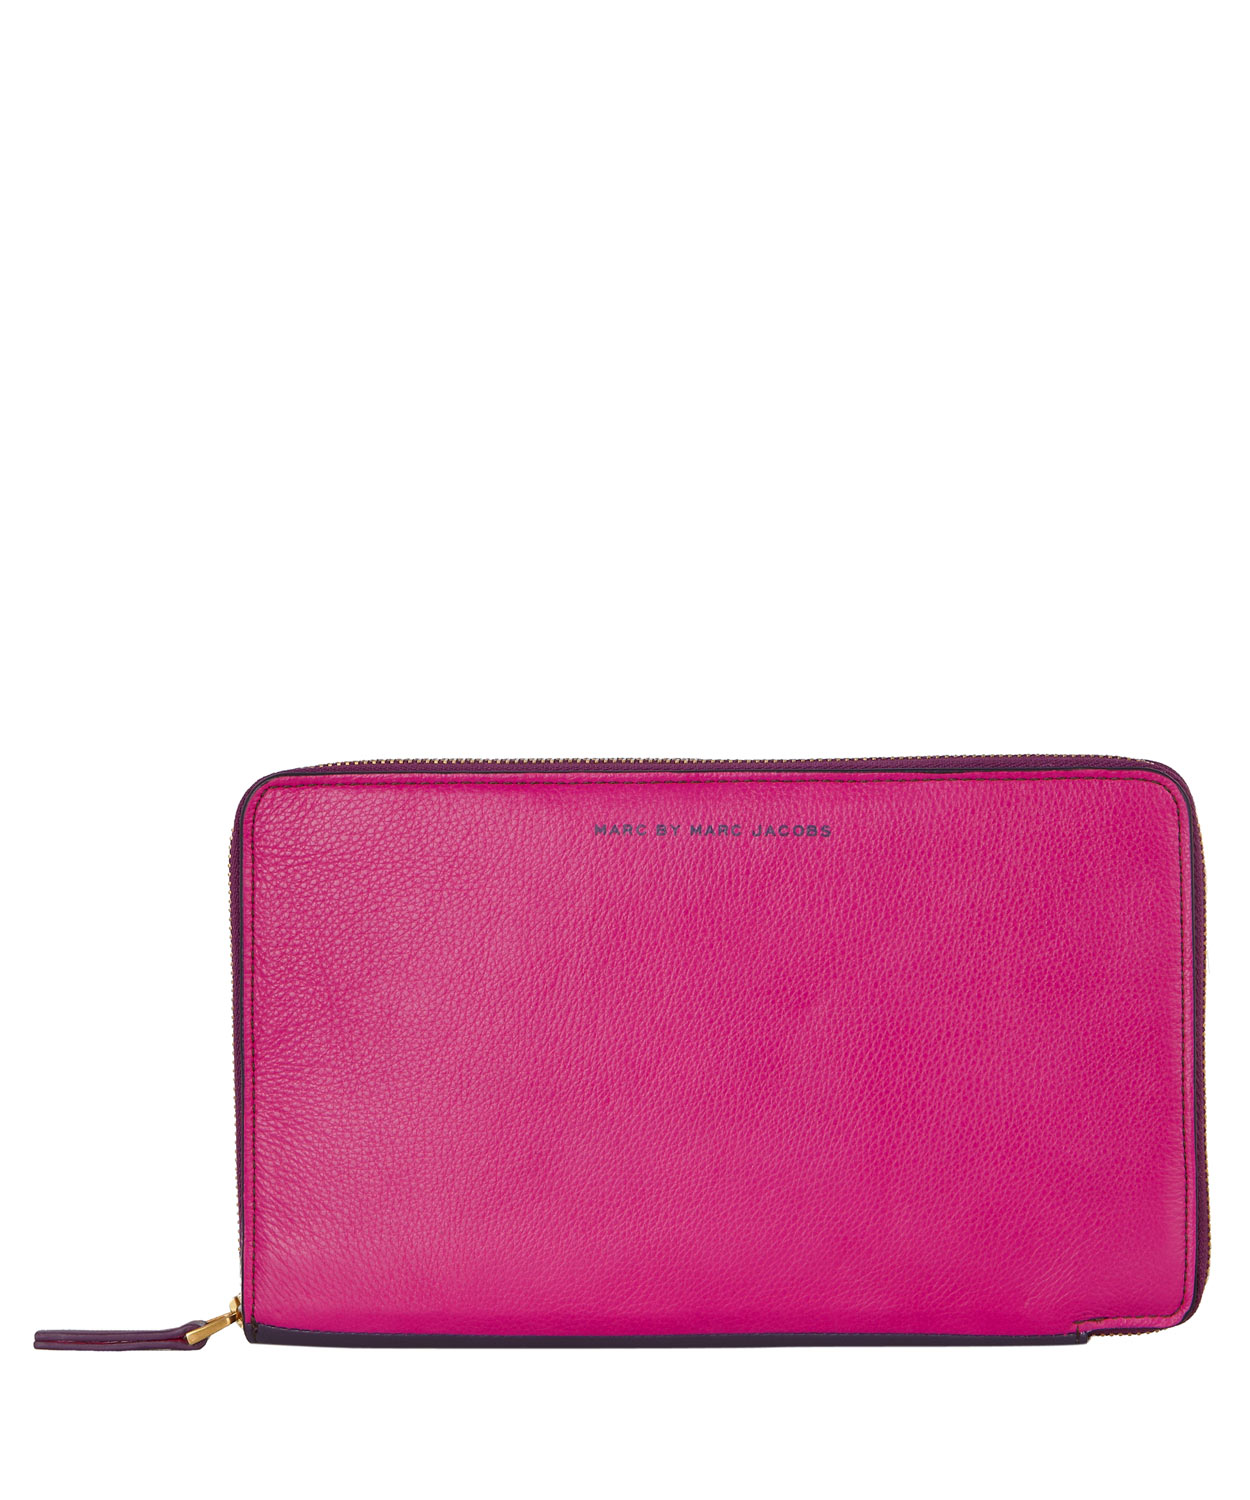 Marc By Marc Jacobs Pink Sophisticato Leather Travel Wallet in Purple ...